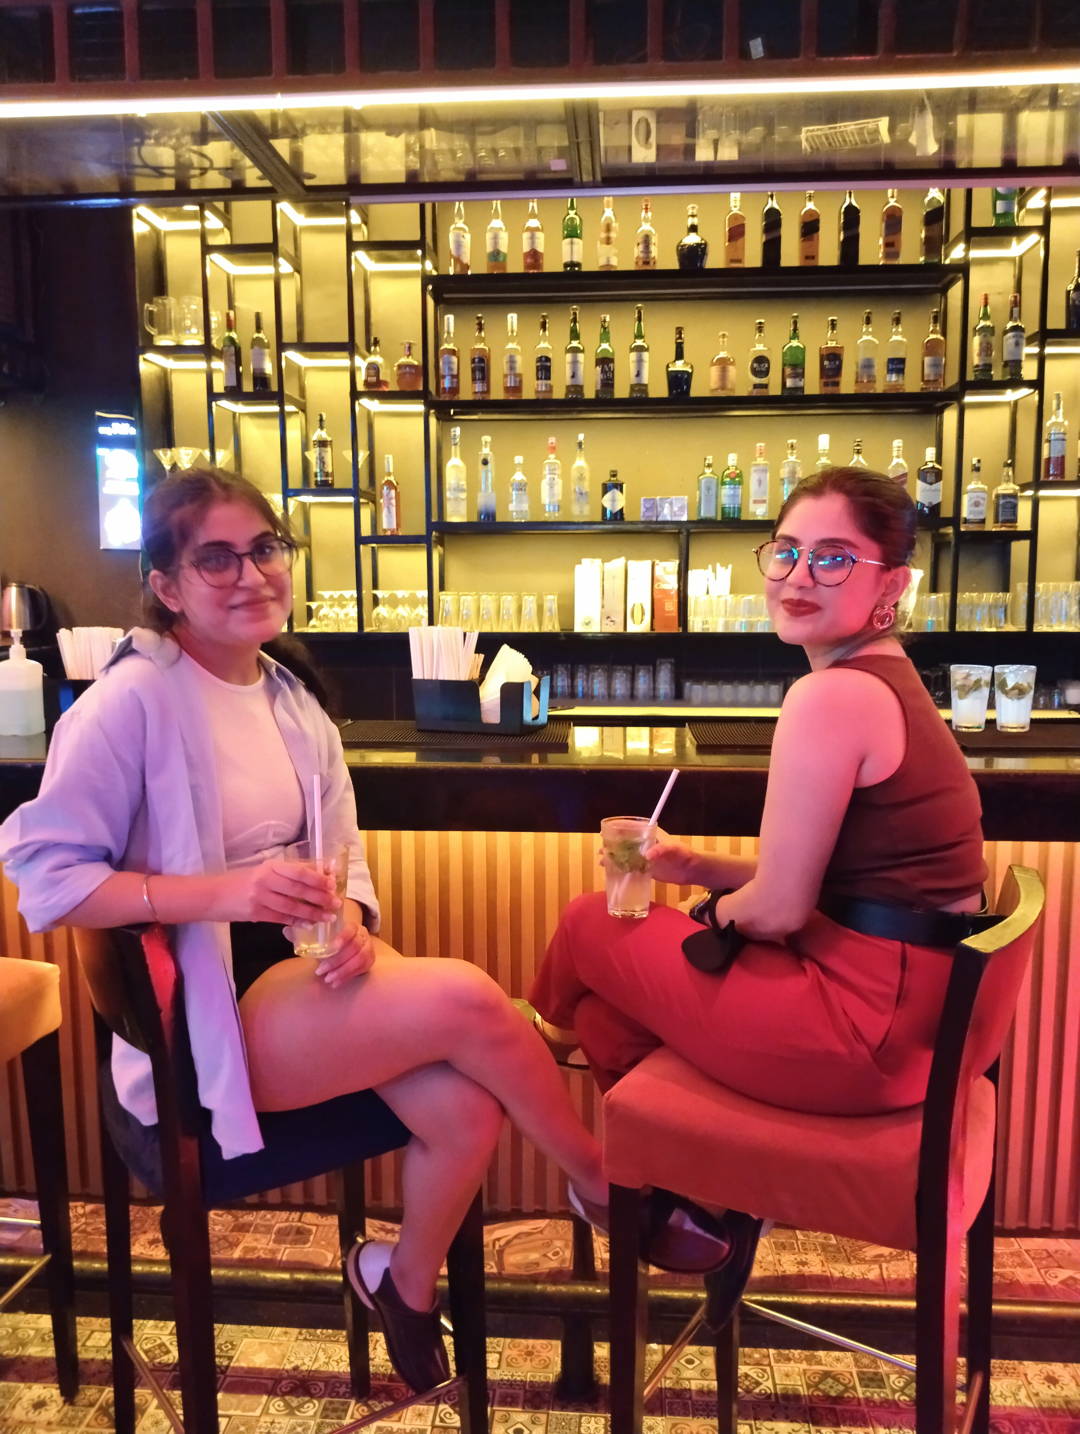 Strike the mid-week stress with ladies’ night at Smaaash